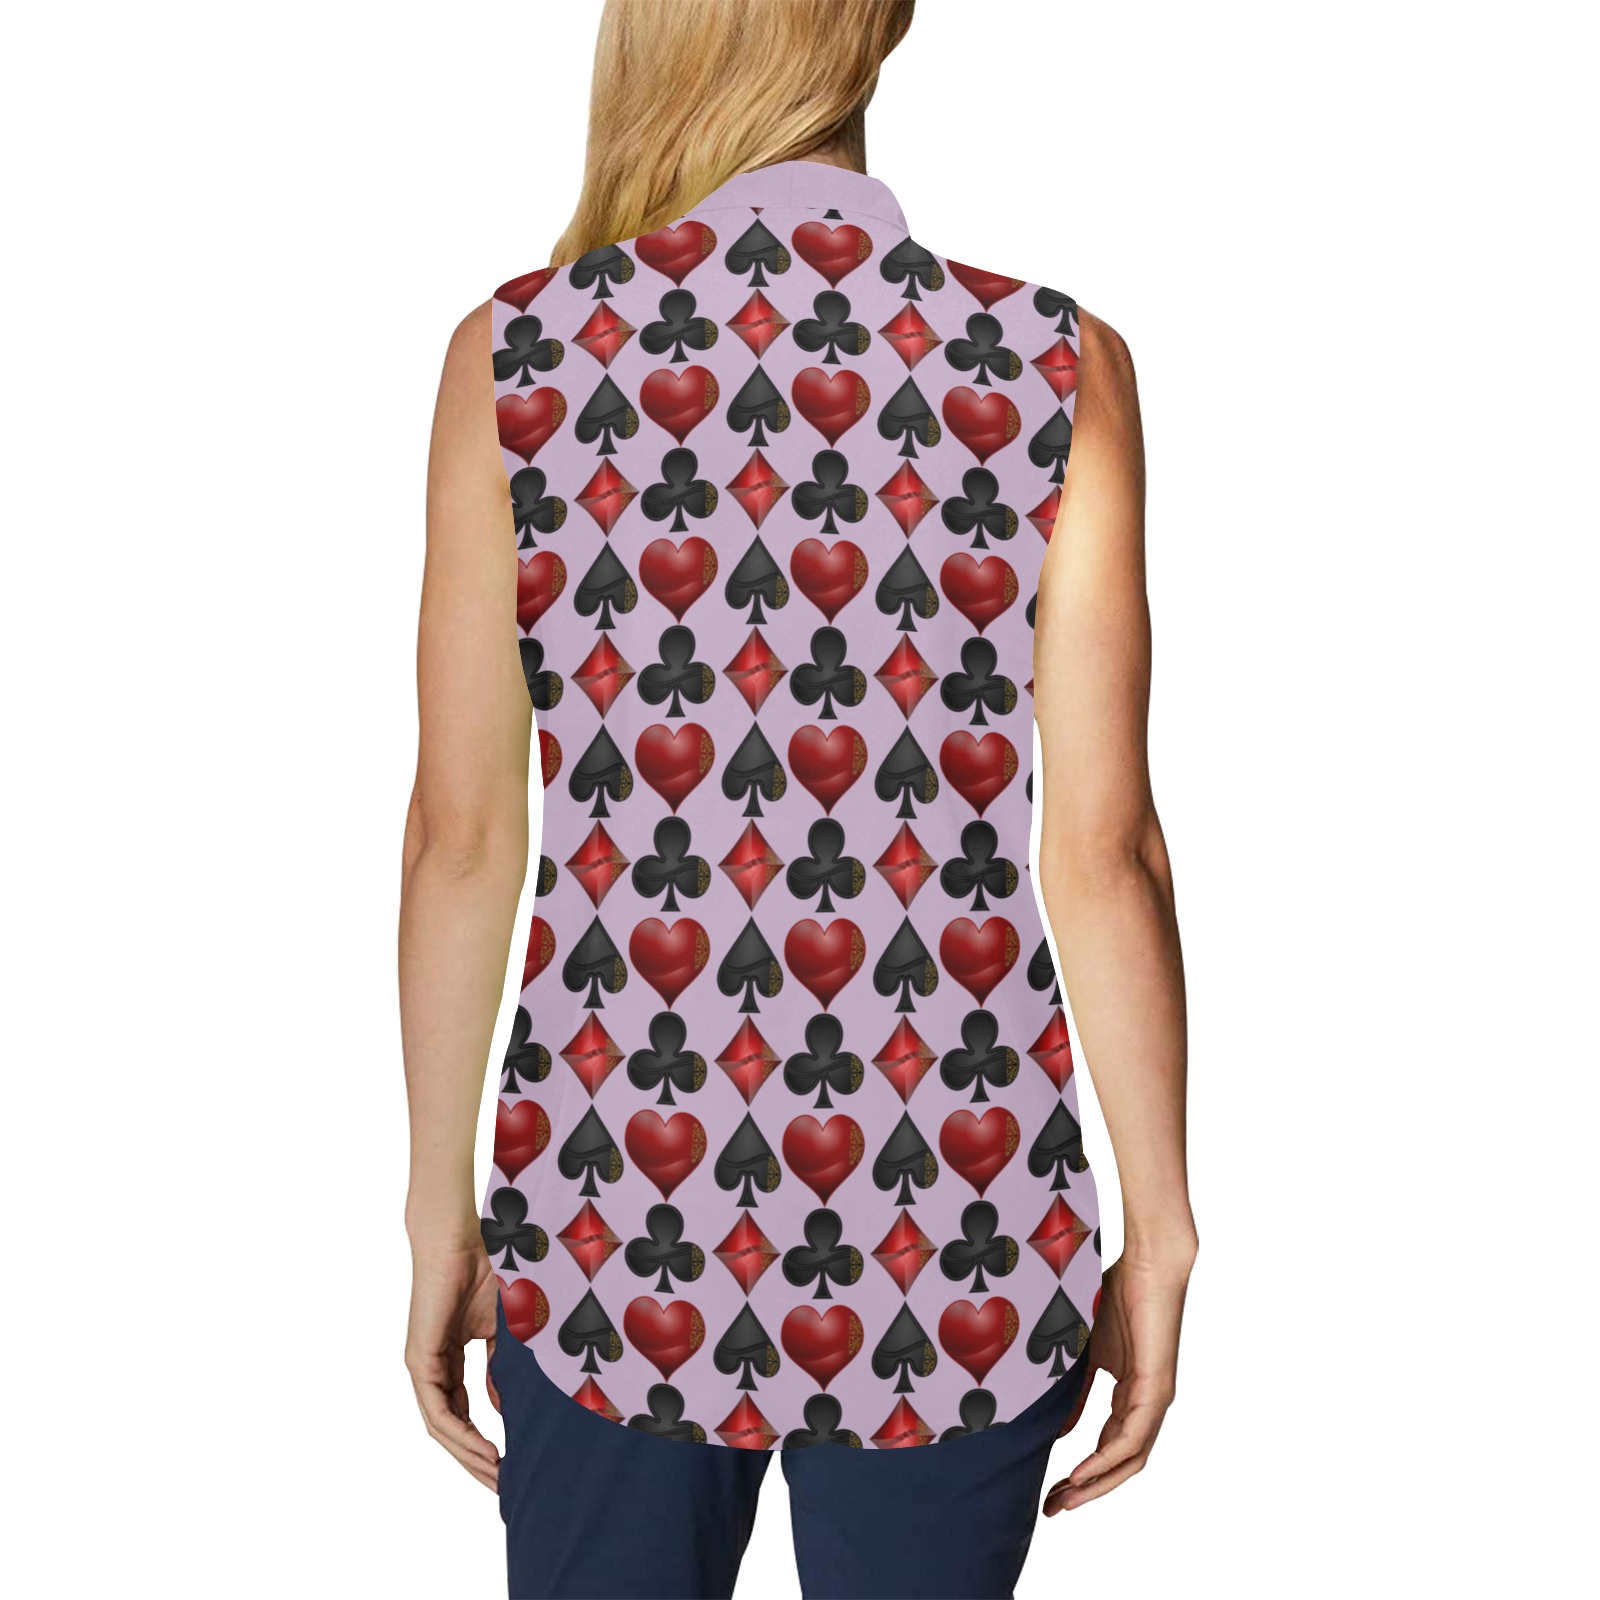 Black Red Playing Card Shapes - Purple Women's Bow Tie V-Neck Sleeveless Shirt (Model T69)